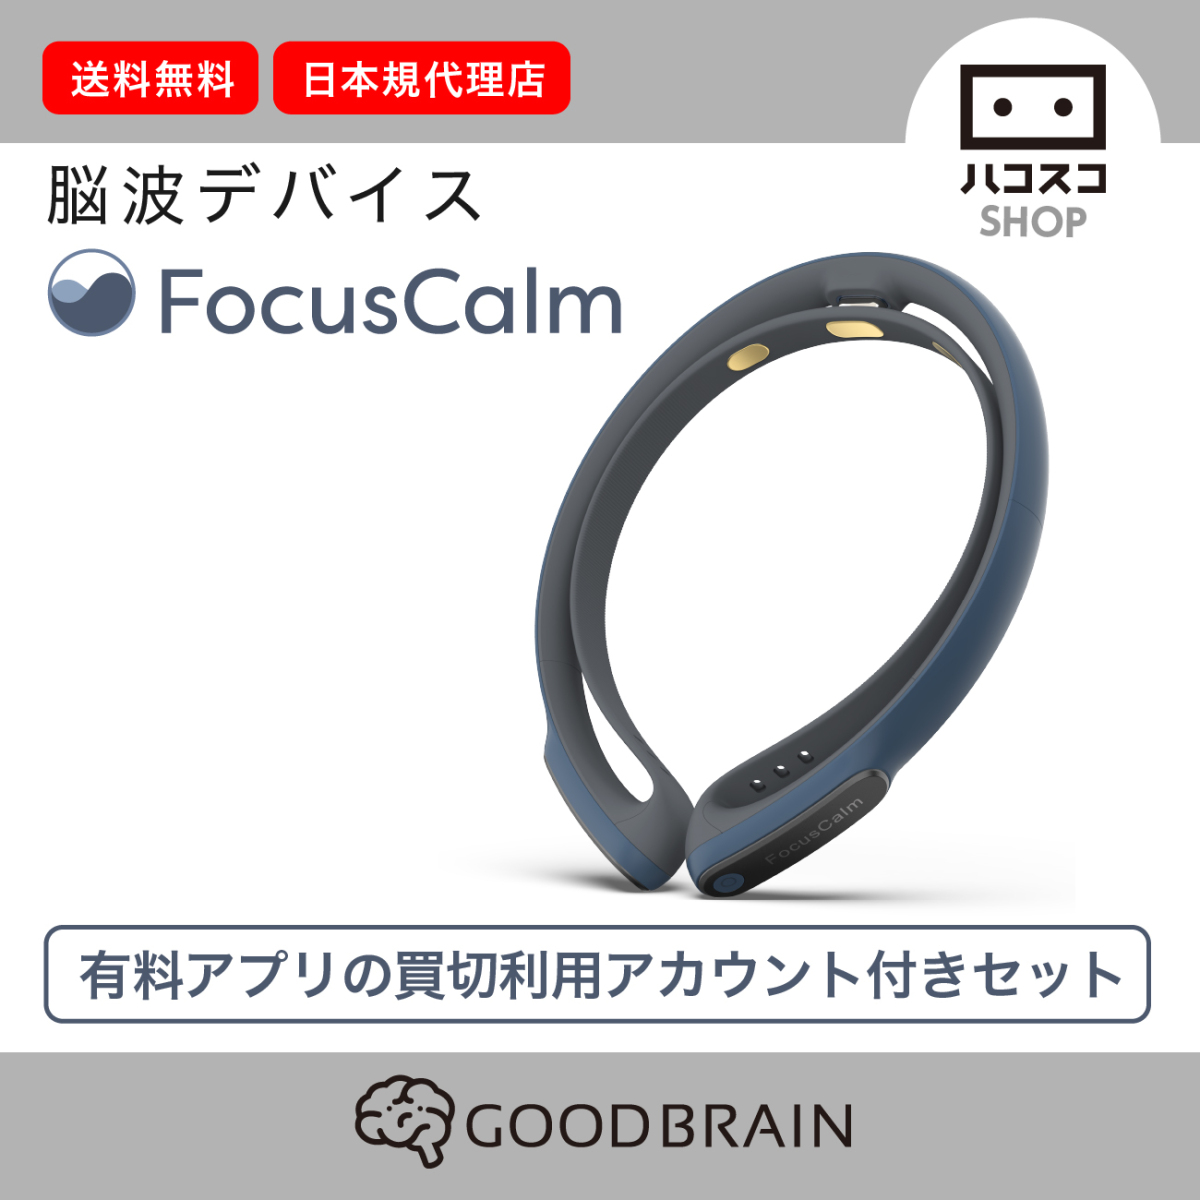 FocusCalm buying cut . account attaching . wave device relax condition . Appli . training . wave ..